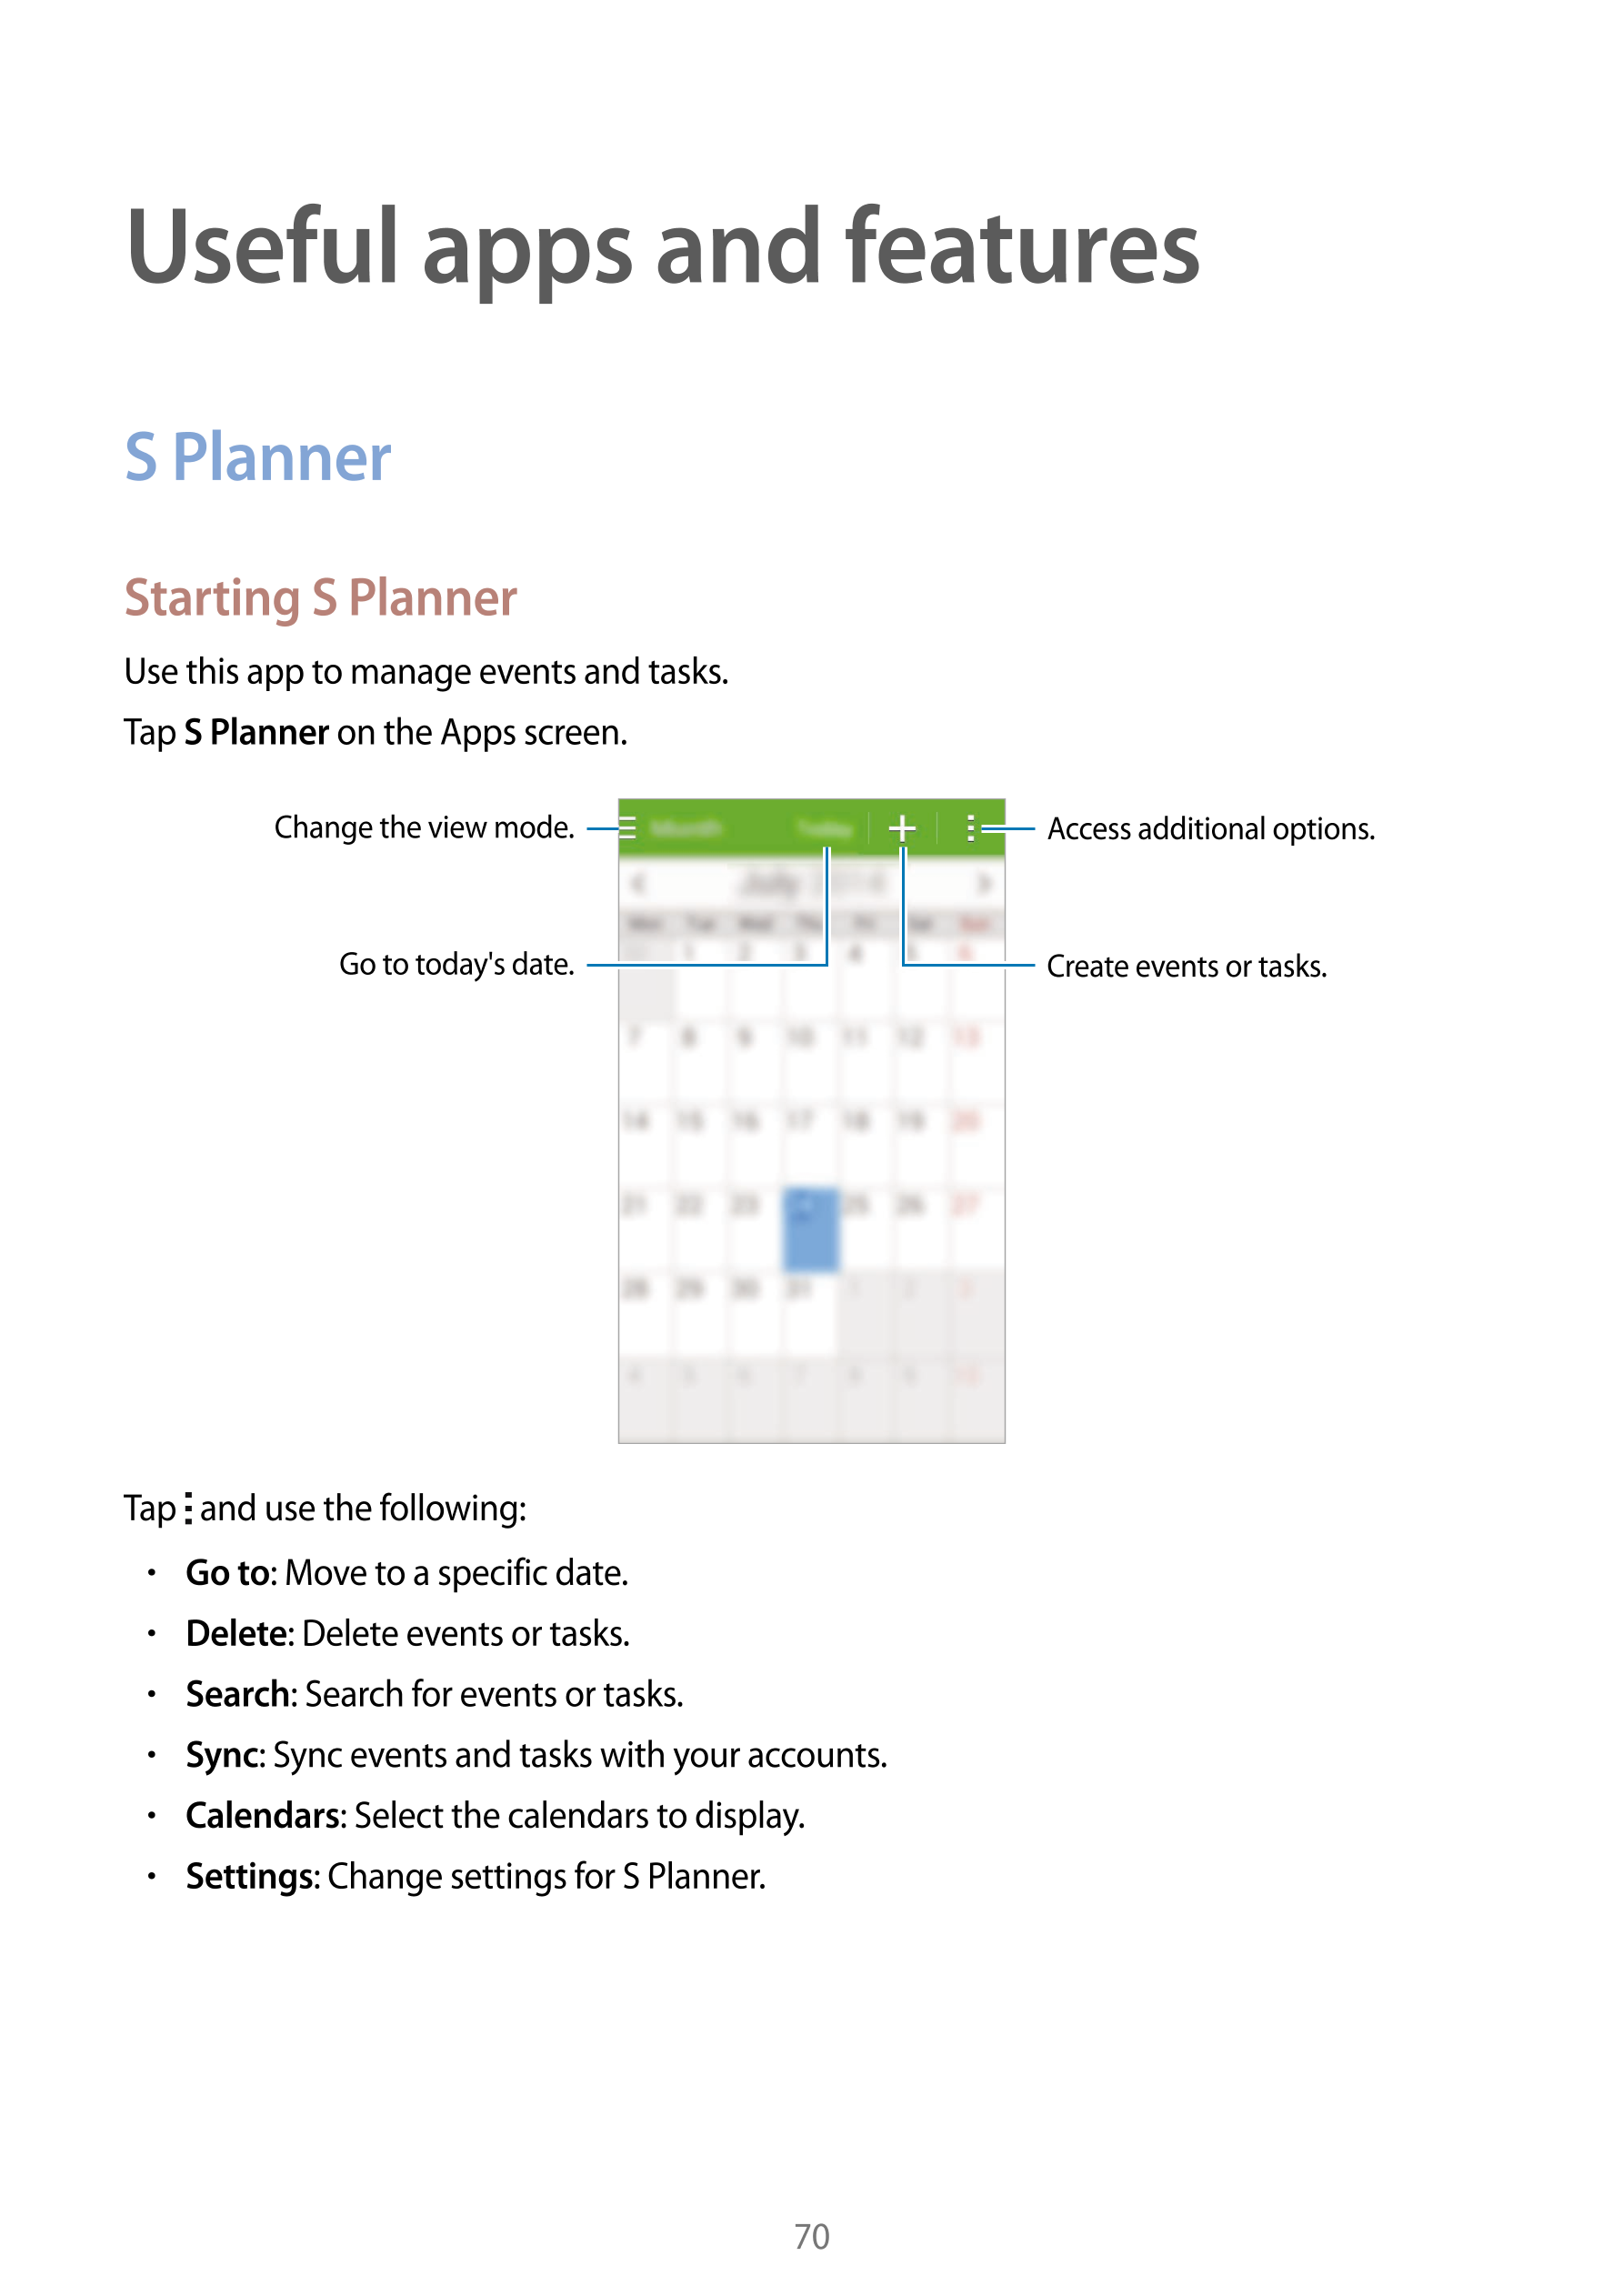 Useful apps and features
S Planner
Starting S Planner
Use this app to manage events and tasks.
Tap  S Planner on the Apps screen